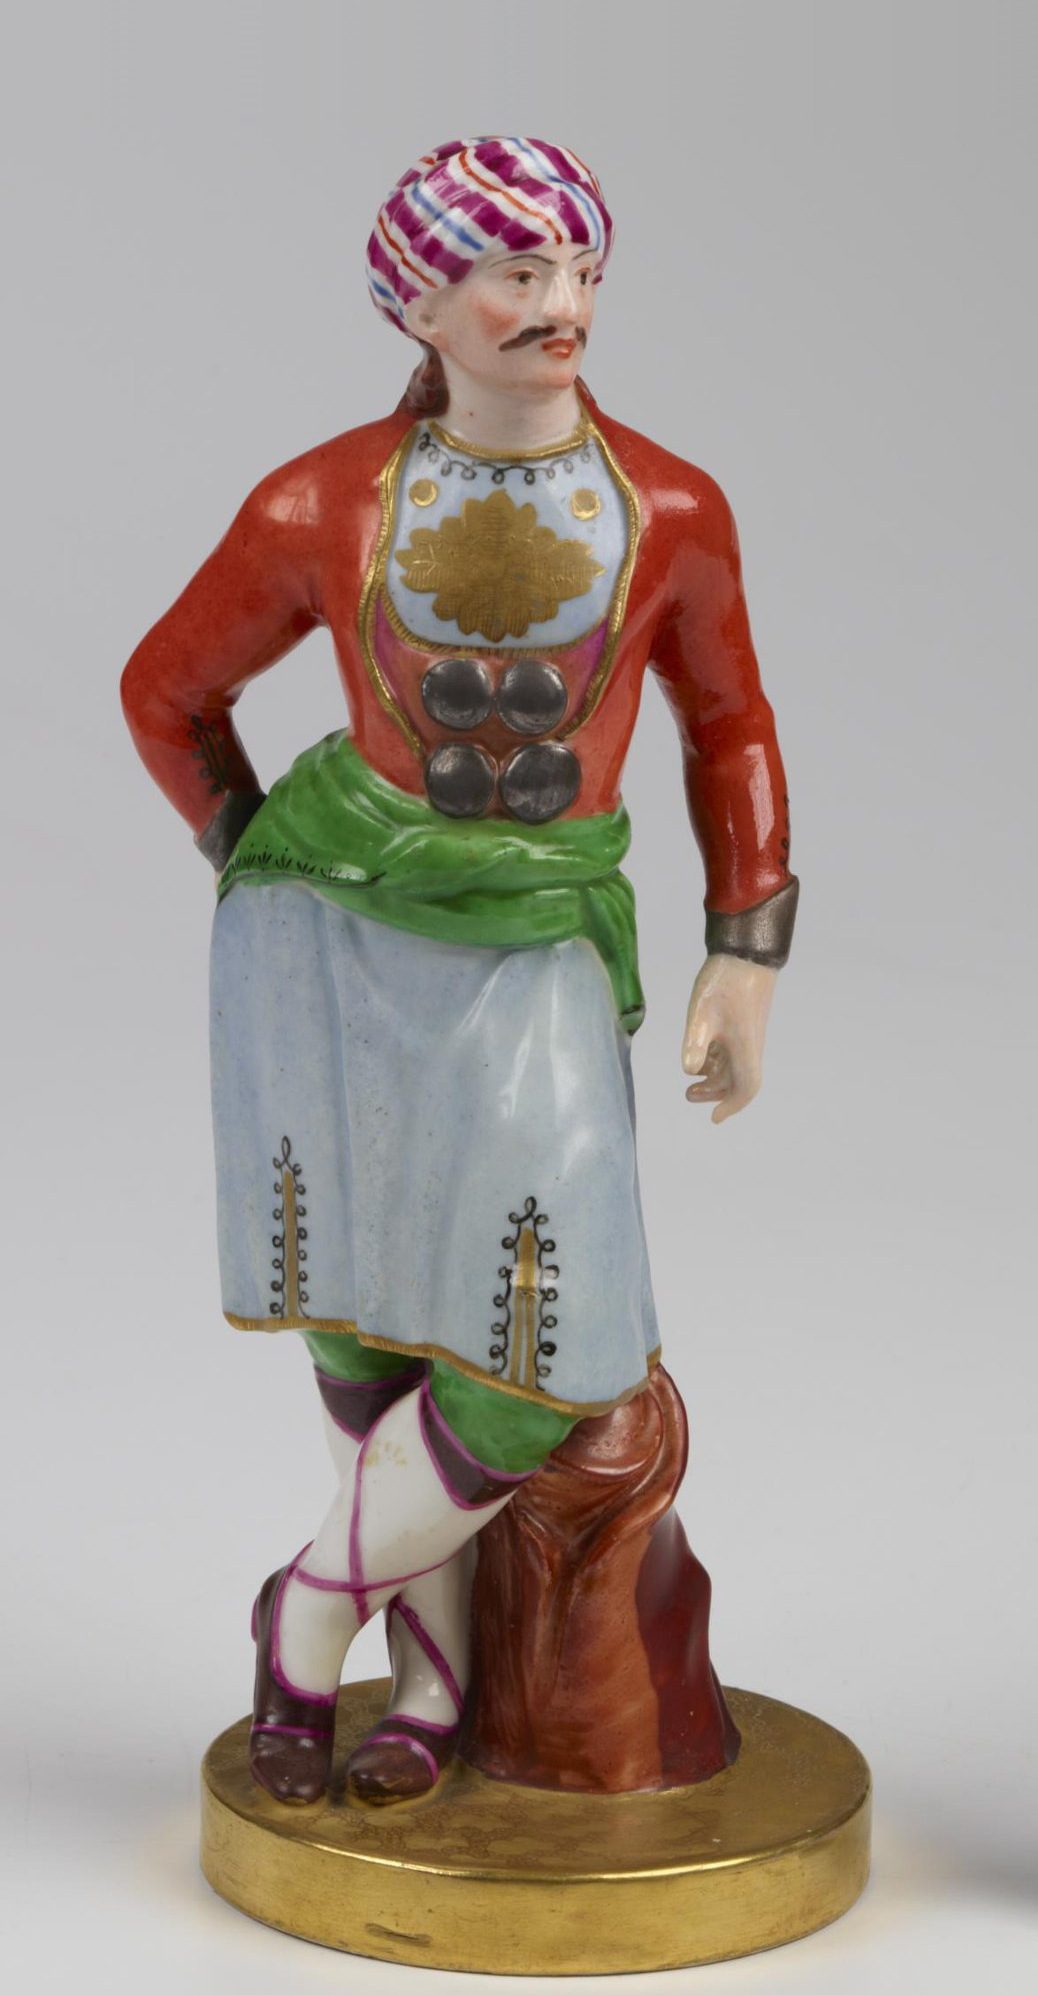 Russian Imperial Porcelain Factory figure of Greek peasant from outskirts of Athens